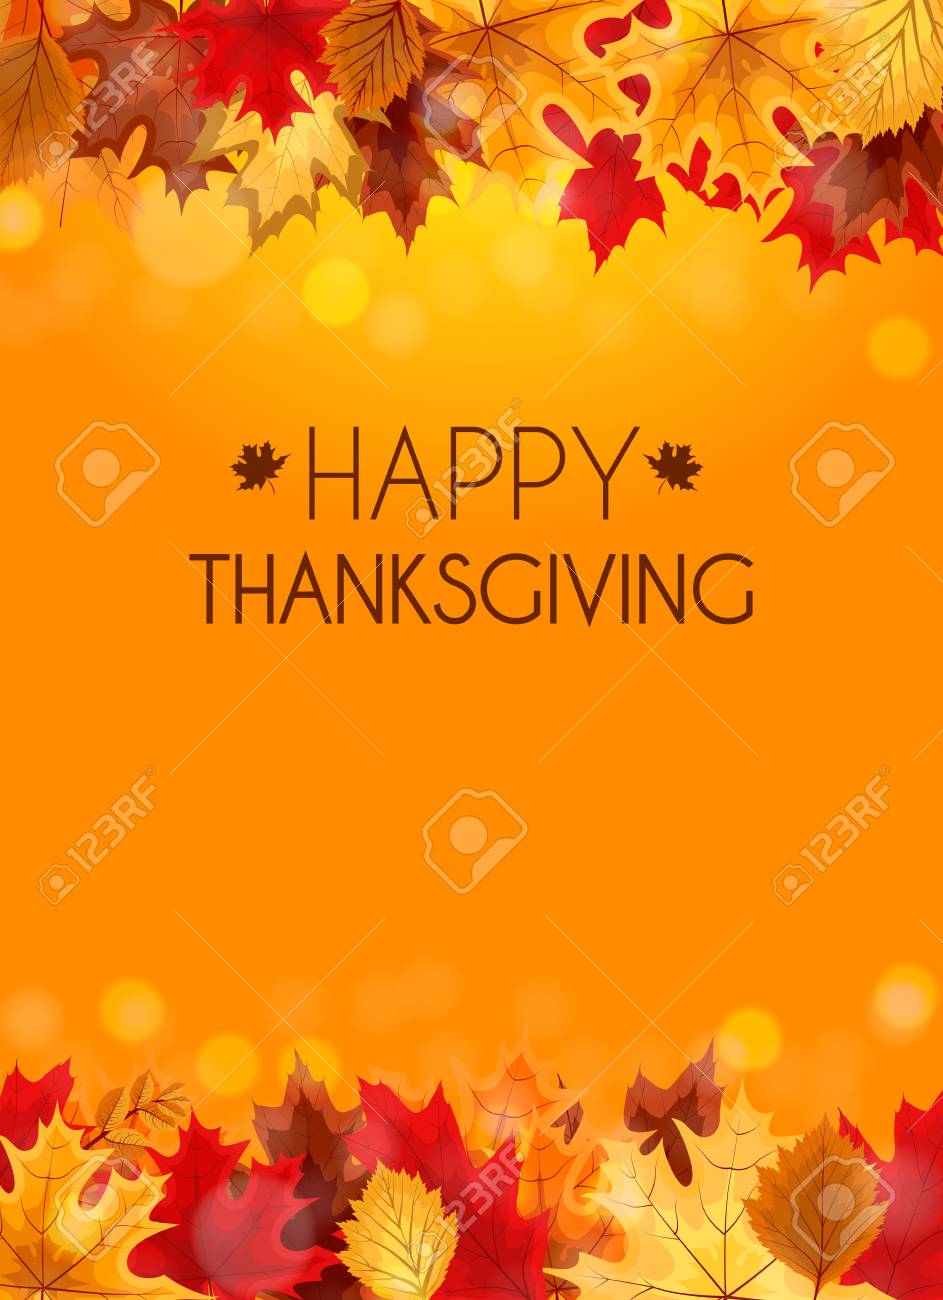 Abstract Vector Illustration Autumn Happy Thanksgiving Background